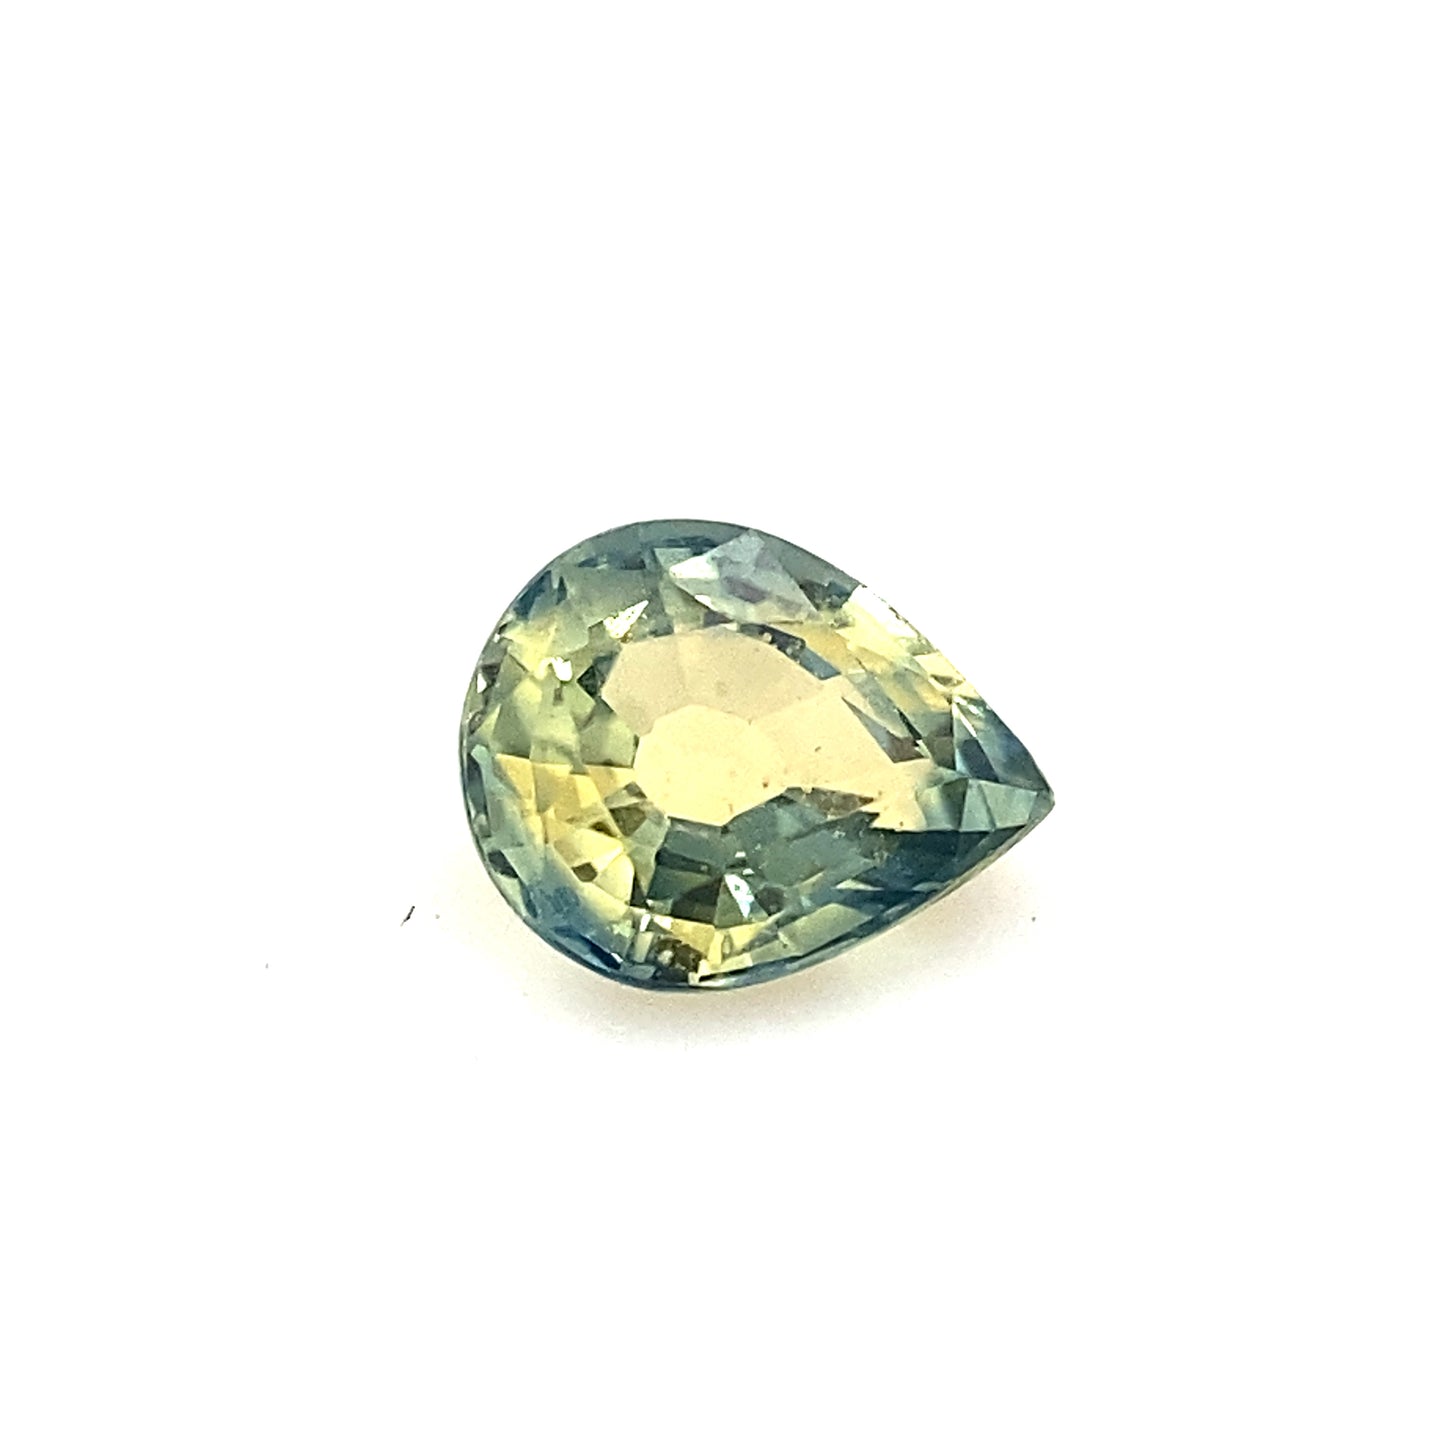 LOOSE STONE / Yellow sapphire with blue contours of 0.41ct / Total value 11,990 pesos